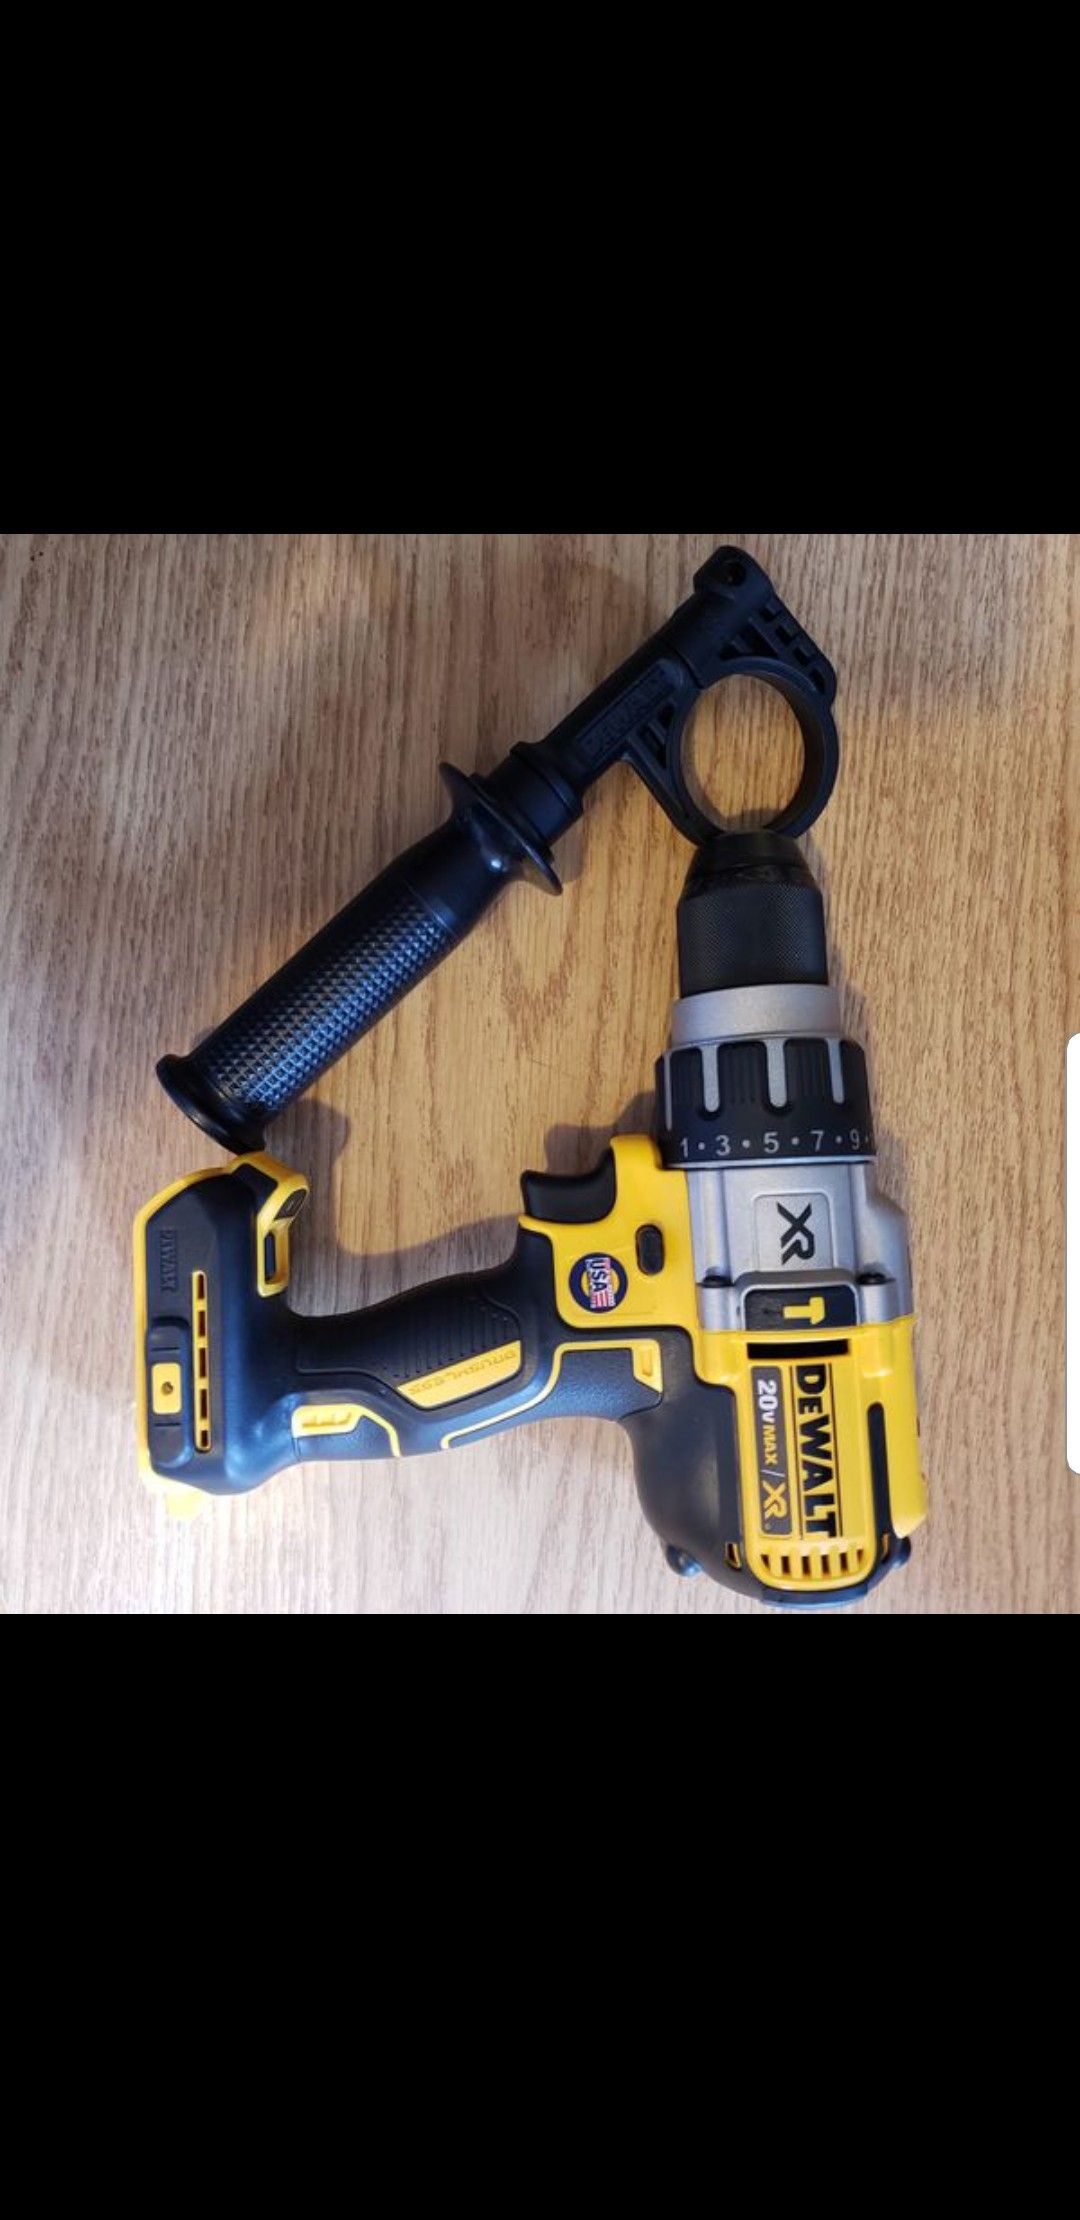 DeWalt XR brushless 3 speed hammer drill. Brand new. No battery or charge